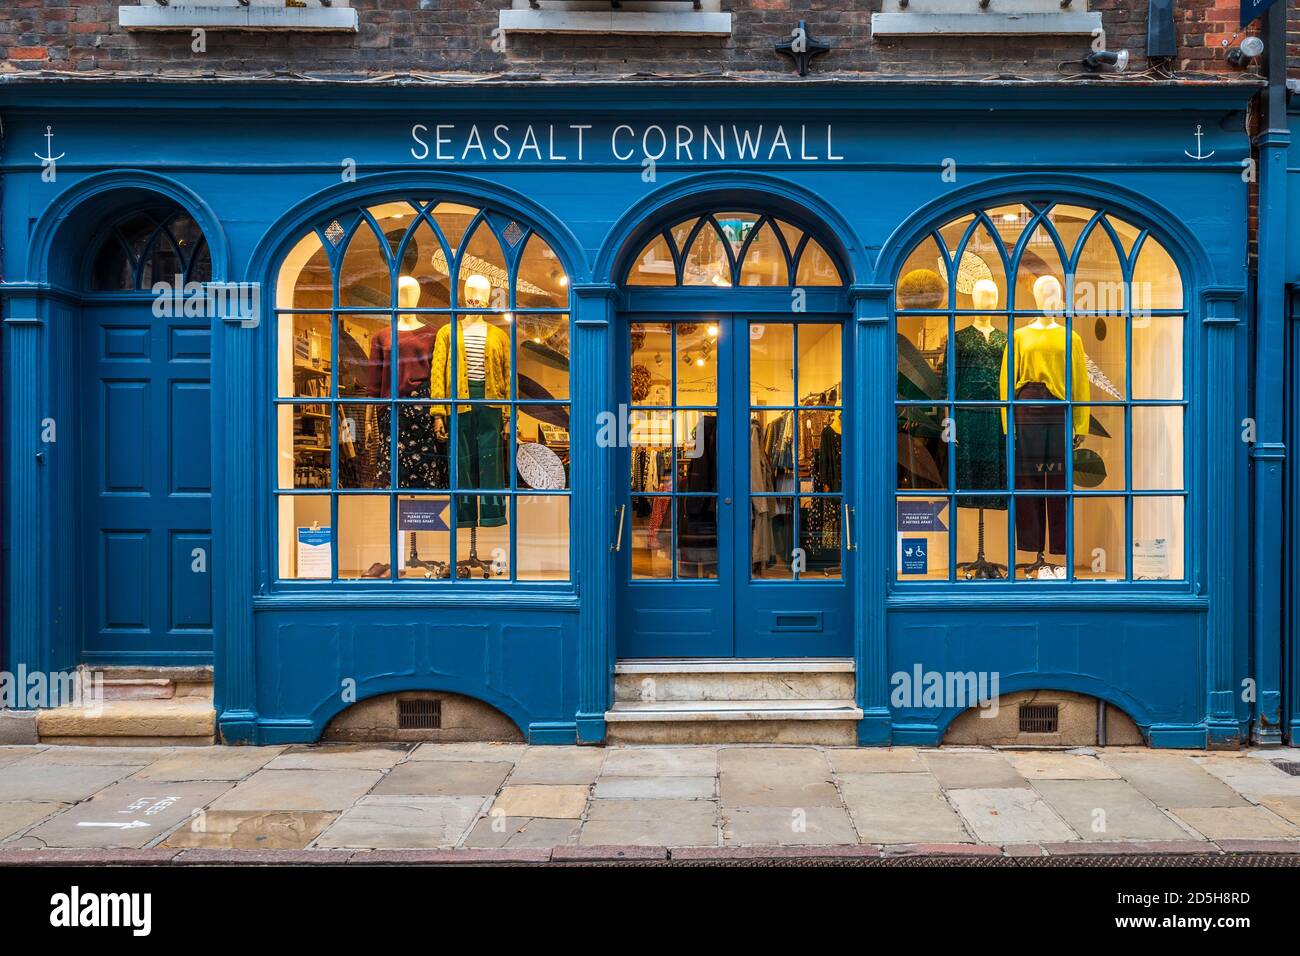 Seasalt Store - Seasalt Cornwall Store in Cambridge.  Seasalt Cornwall is a clothing retailer founded in 1981 in Cornwall. Stock Photo